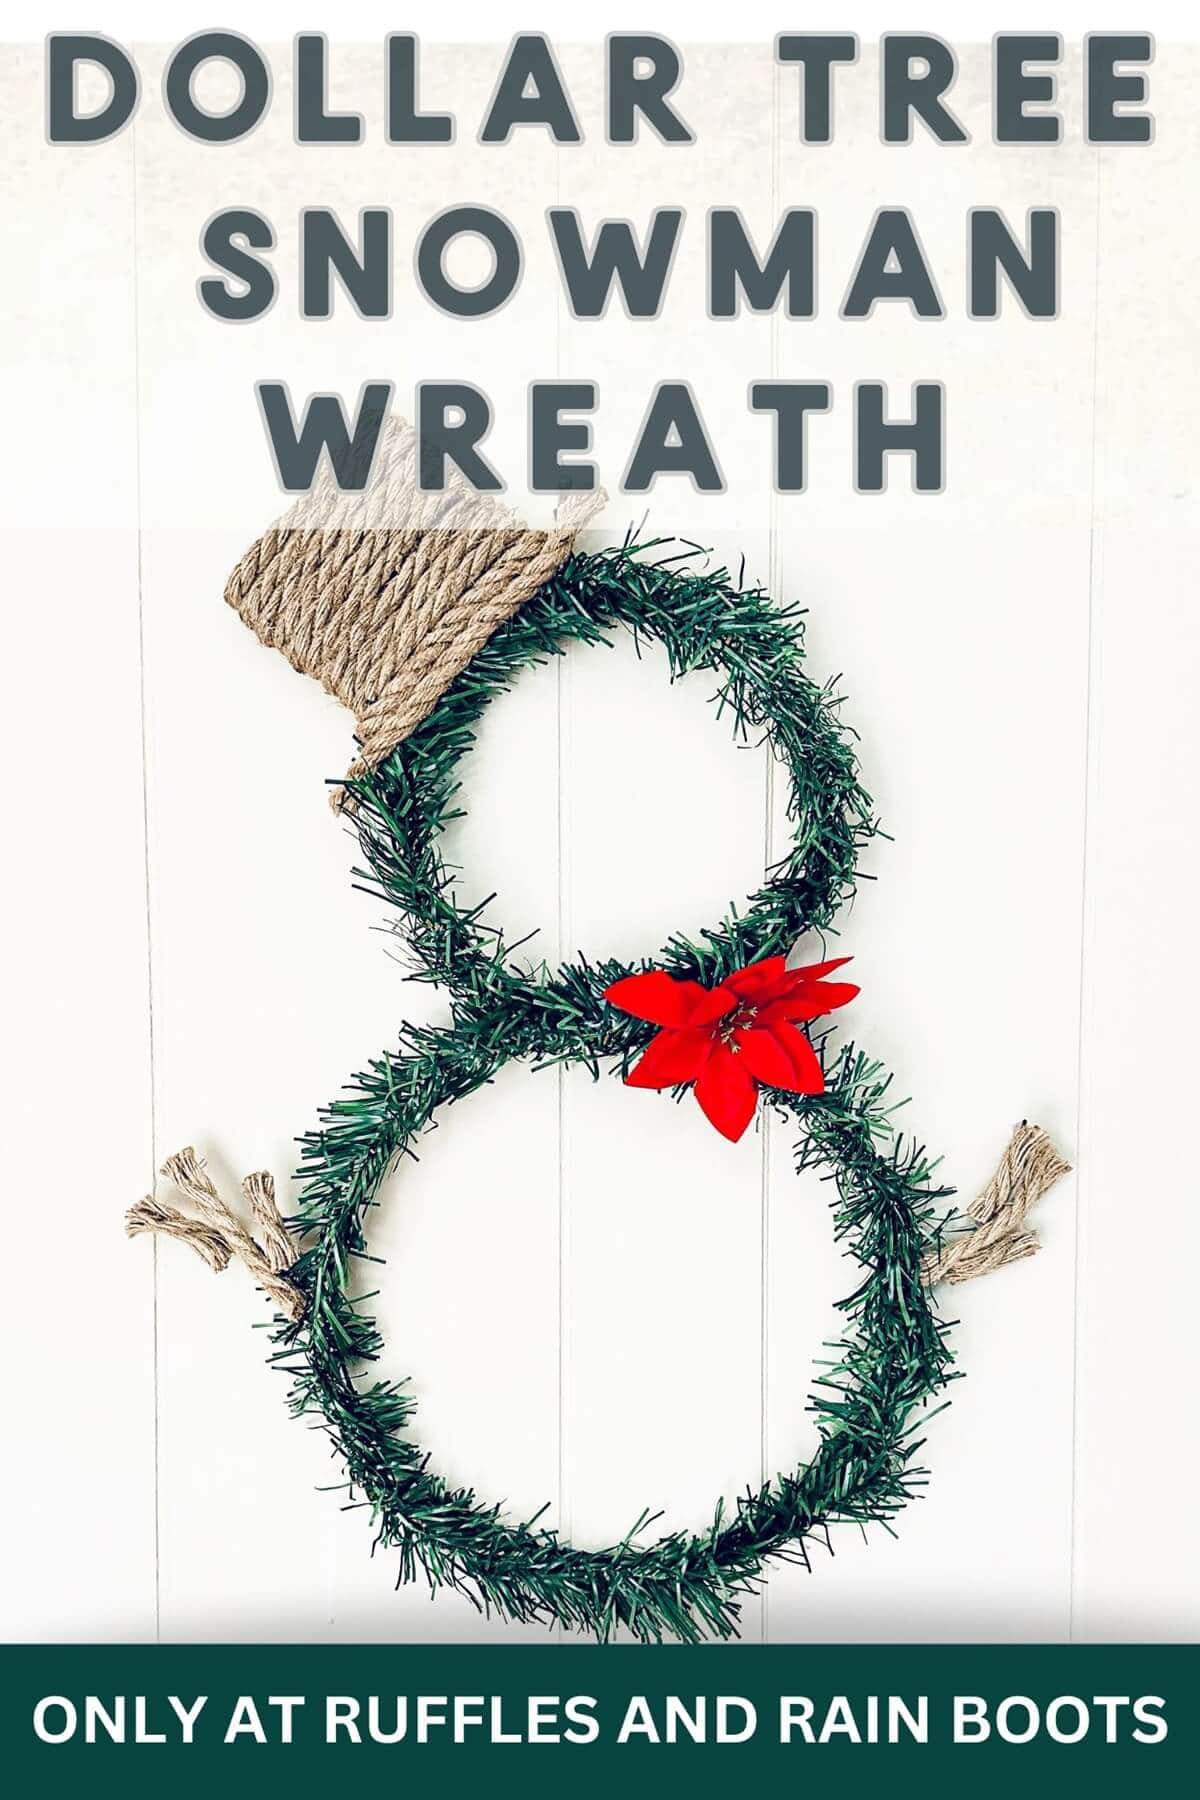 A rustic snowman wreath from the Dollar Tree against a white wooden background.